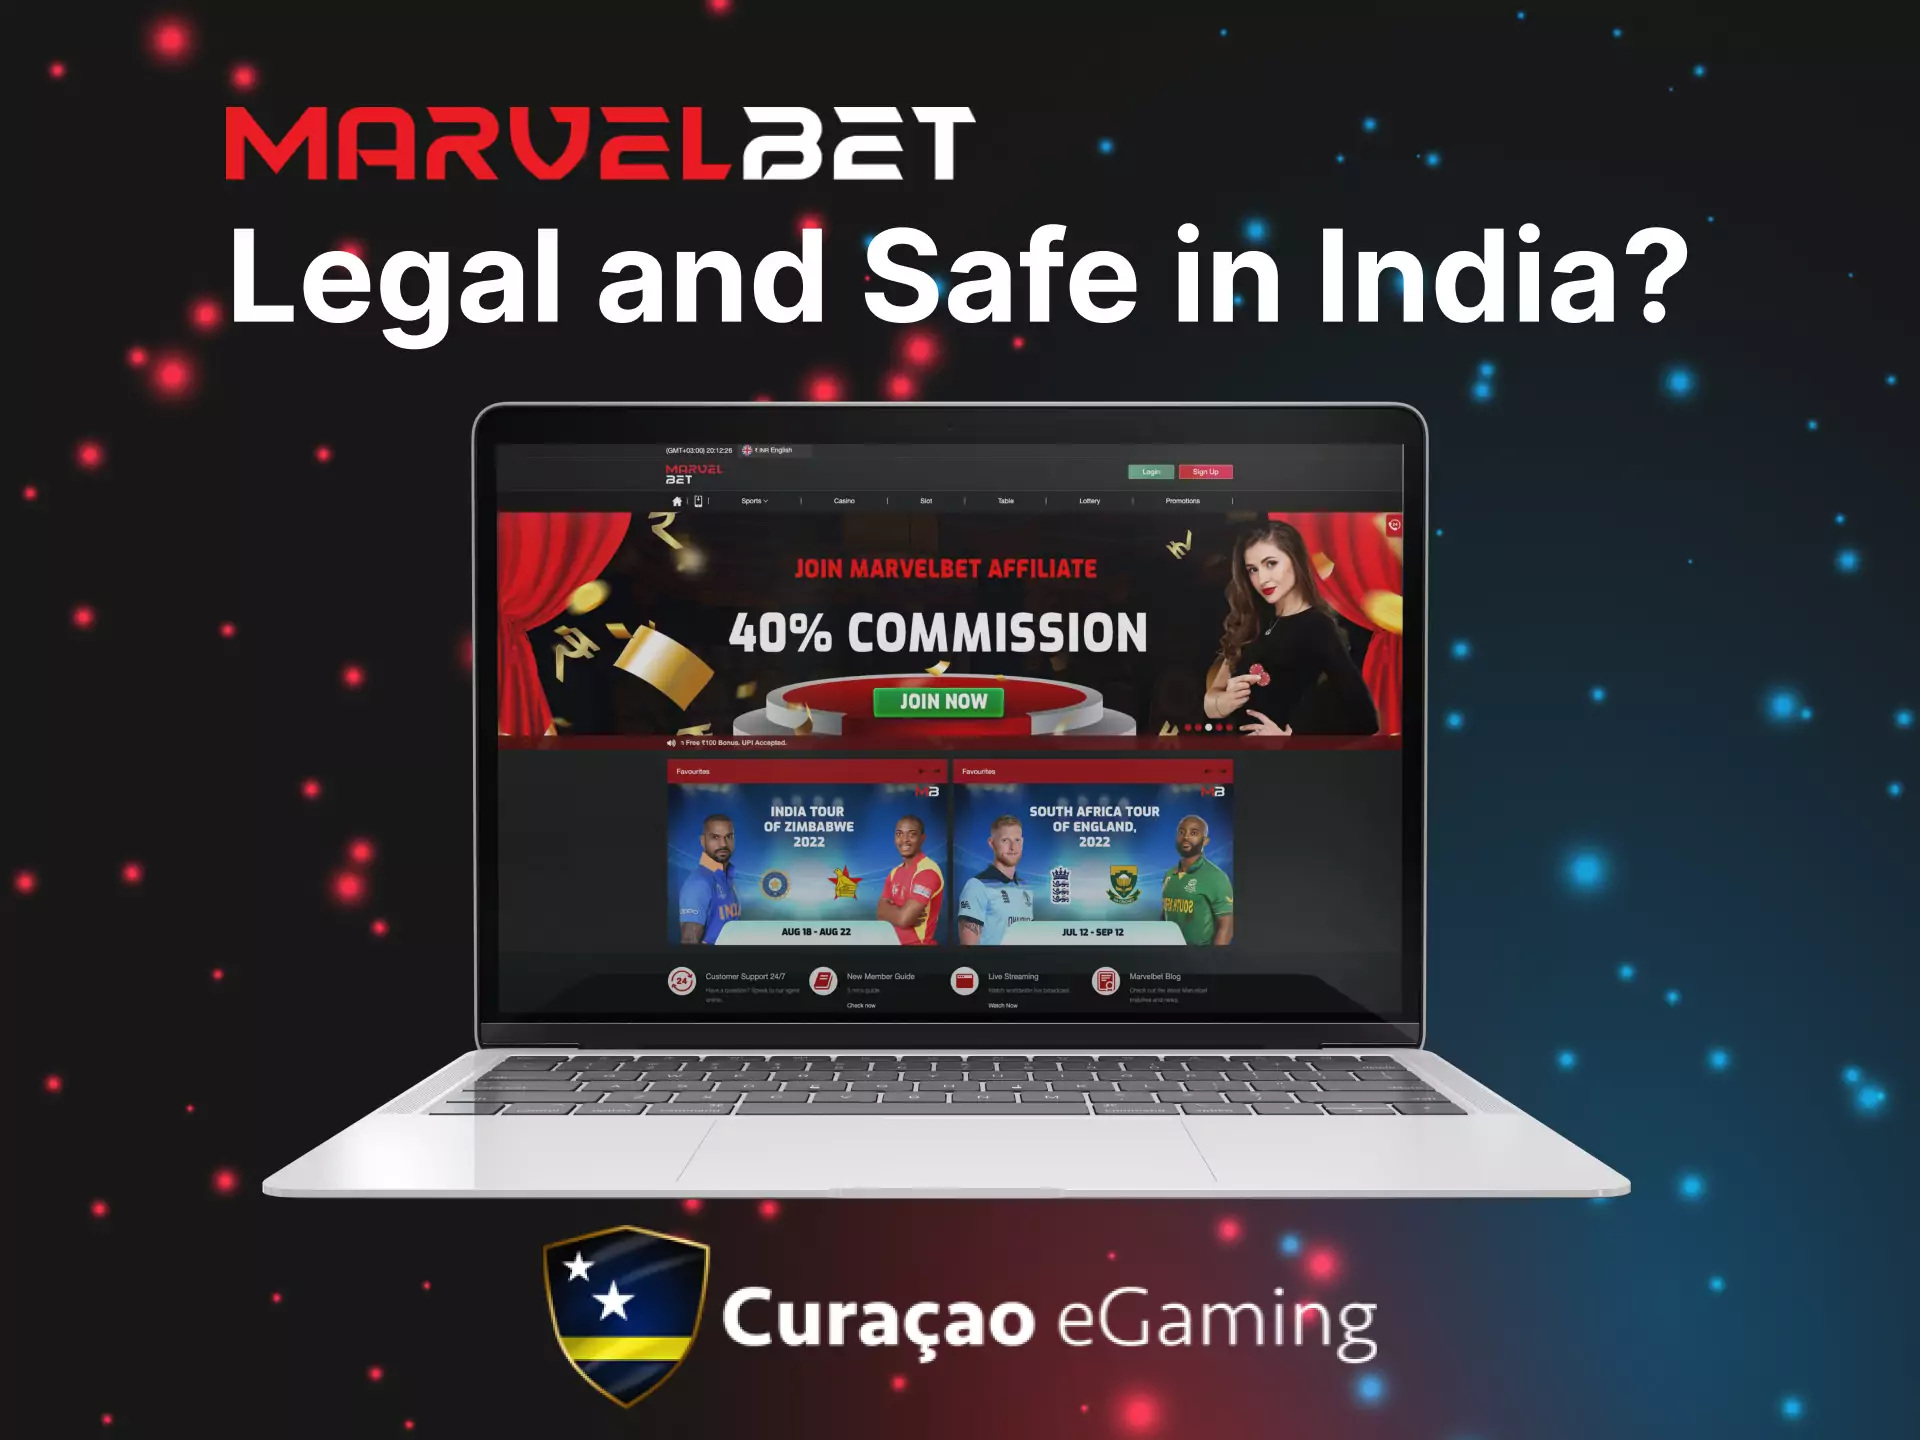 Marvelbet works legally in India thanks to the Curacao Egaming license.